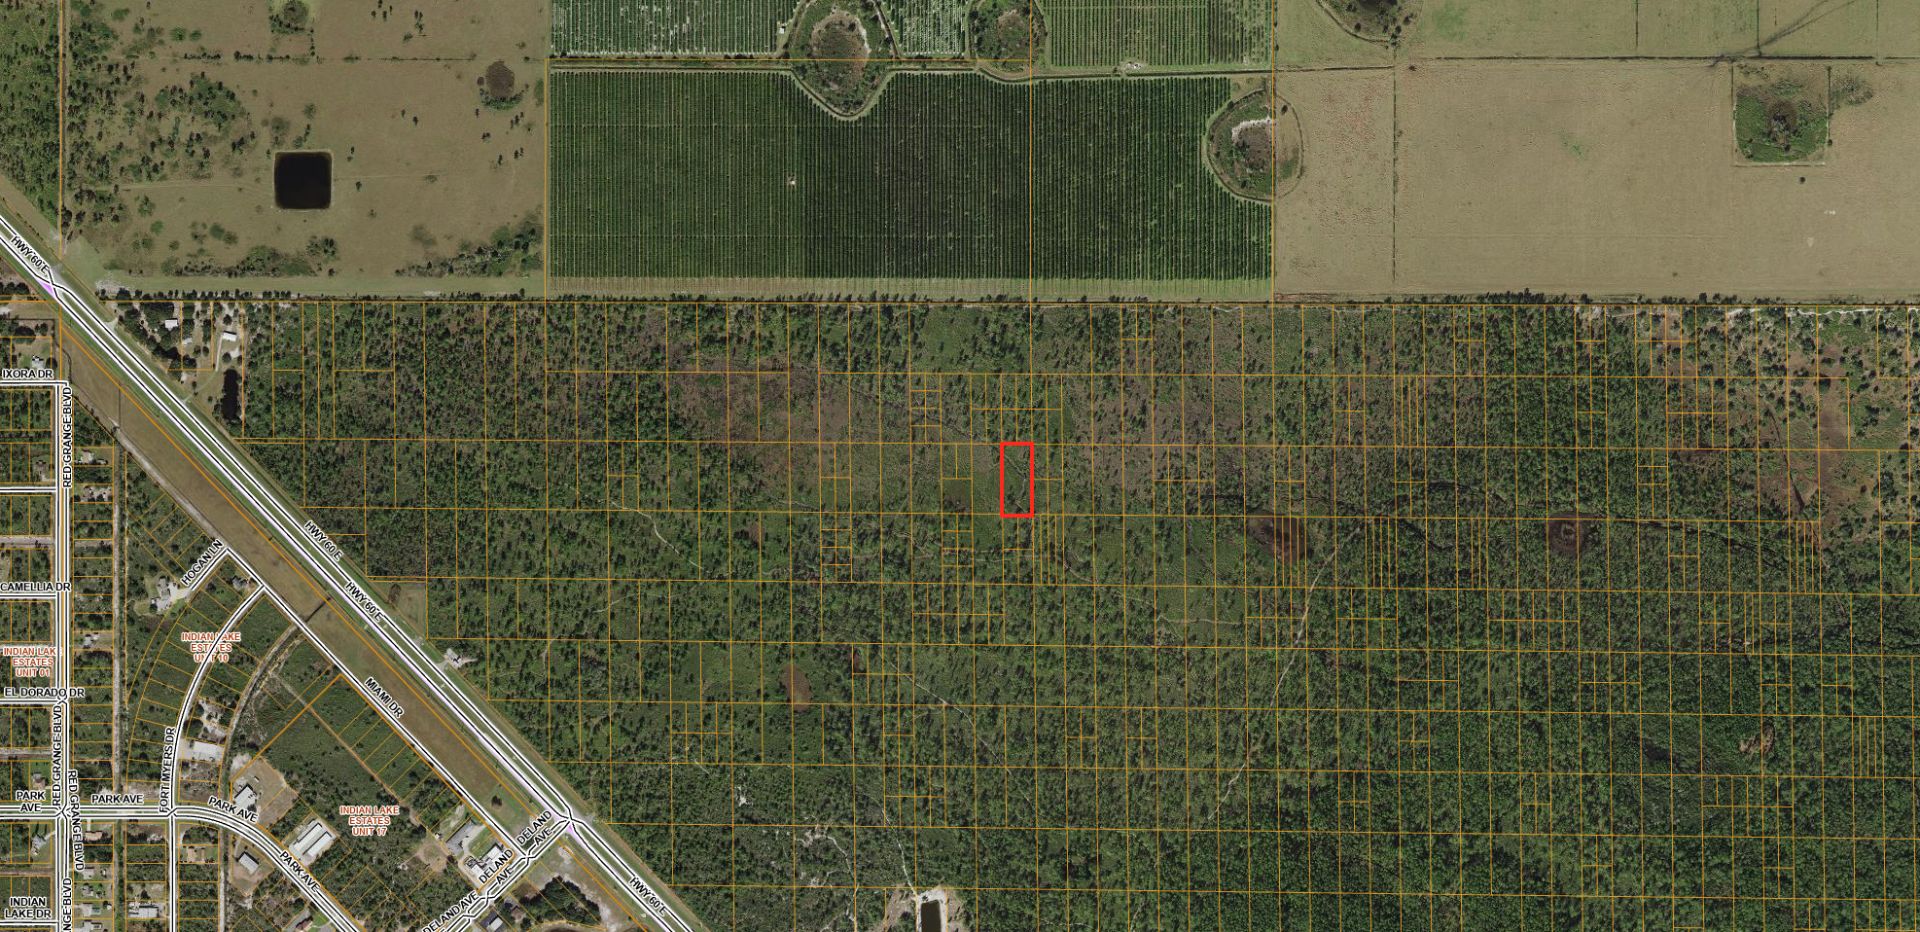 Almost 1.5 Acres Surrounded by Lakes in Sunny Florida! - Image 4 of 10